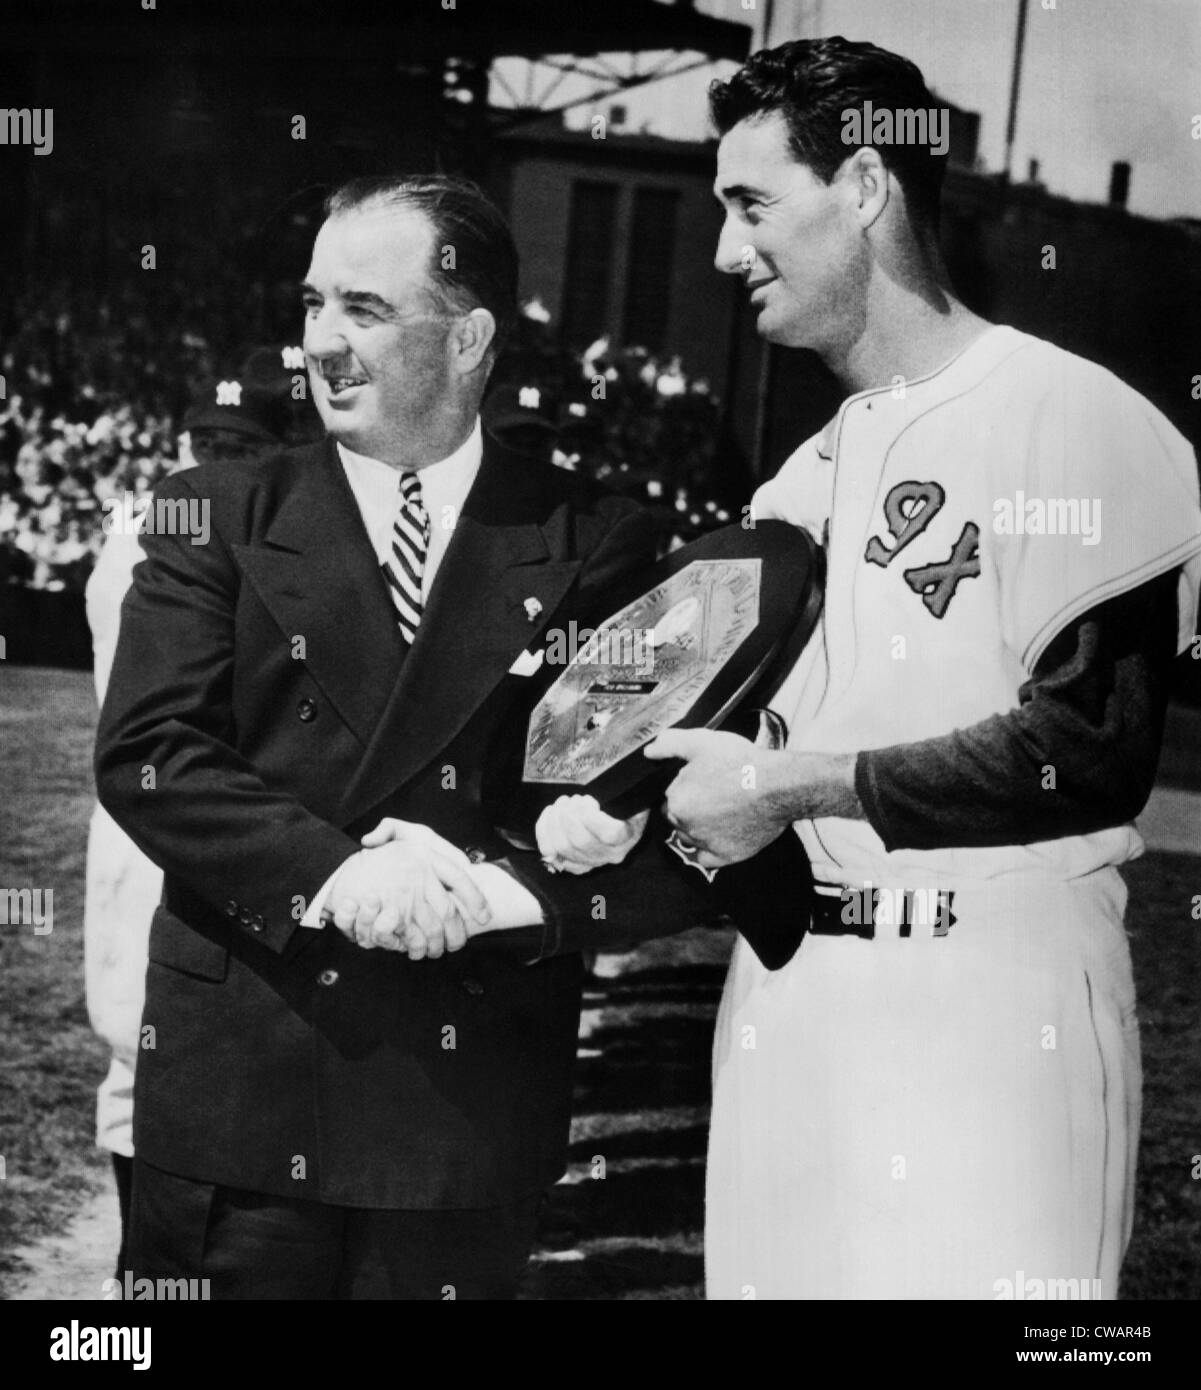 Baseball Commissioner Albert B. Chandler, presents the Most Valuable Player award to Ted Williams of the Boston Red Sox, April Stock Photo